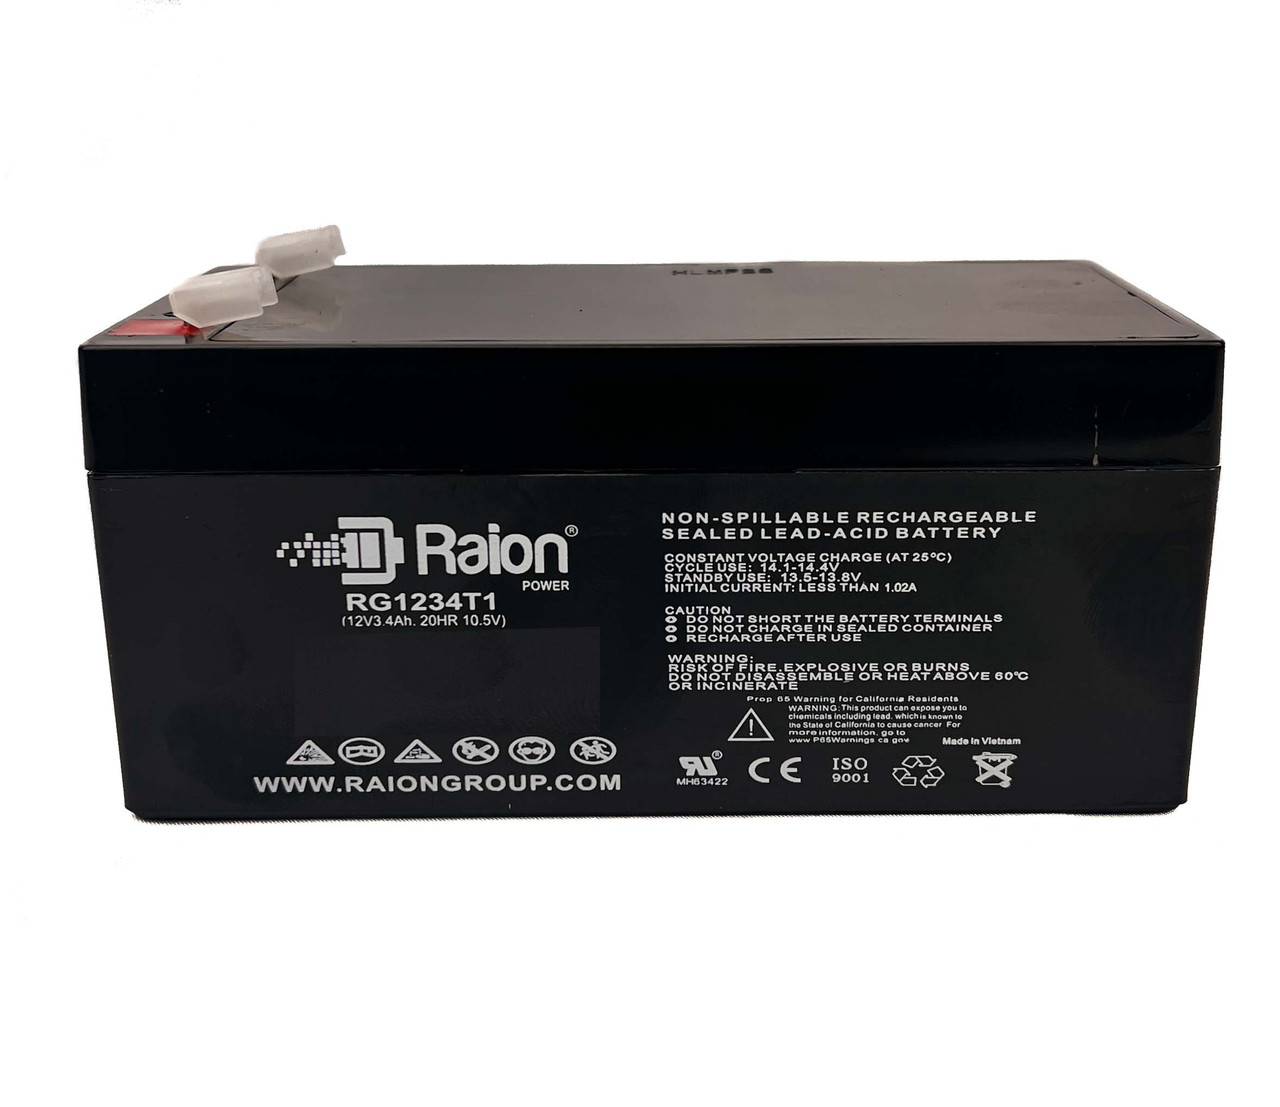 Raion Power RG1234T1 Rechargeable Compatible Replacement Battery for Newport Medical Instruments E150 Breeze Stimulator